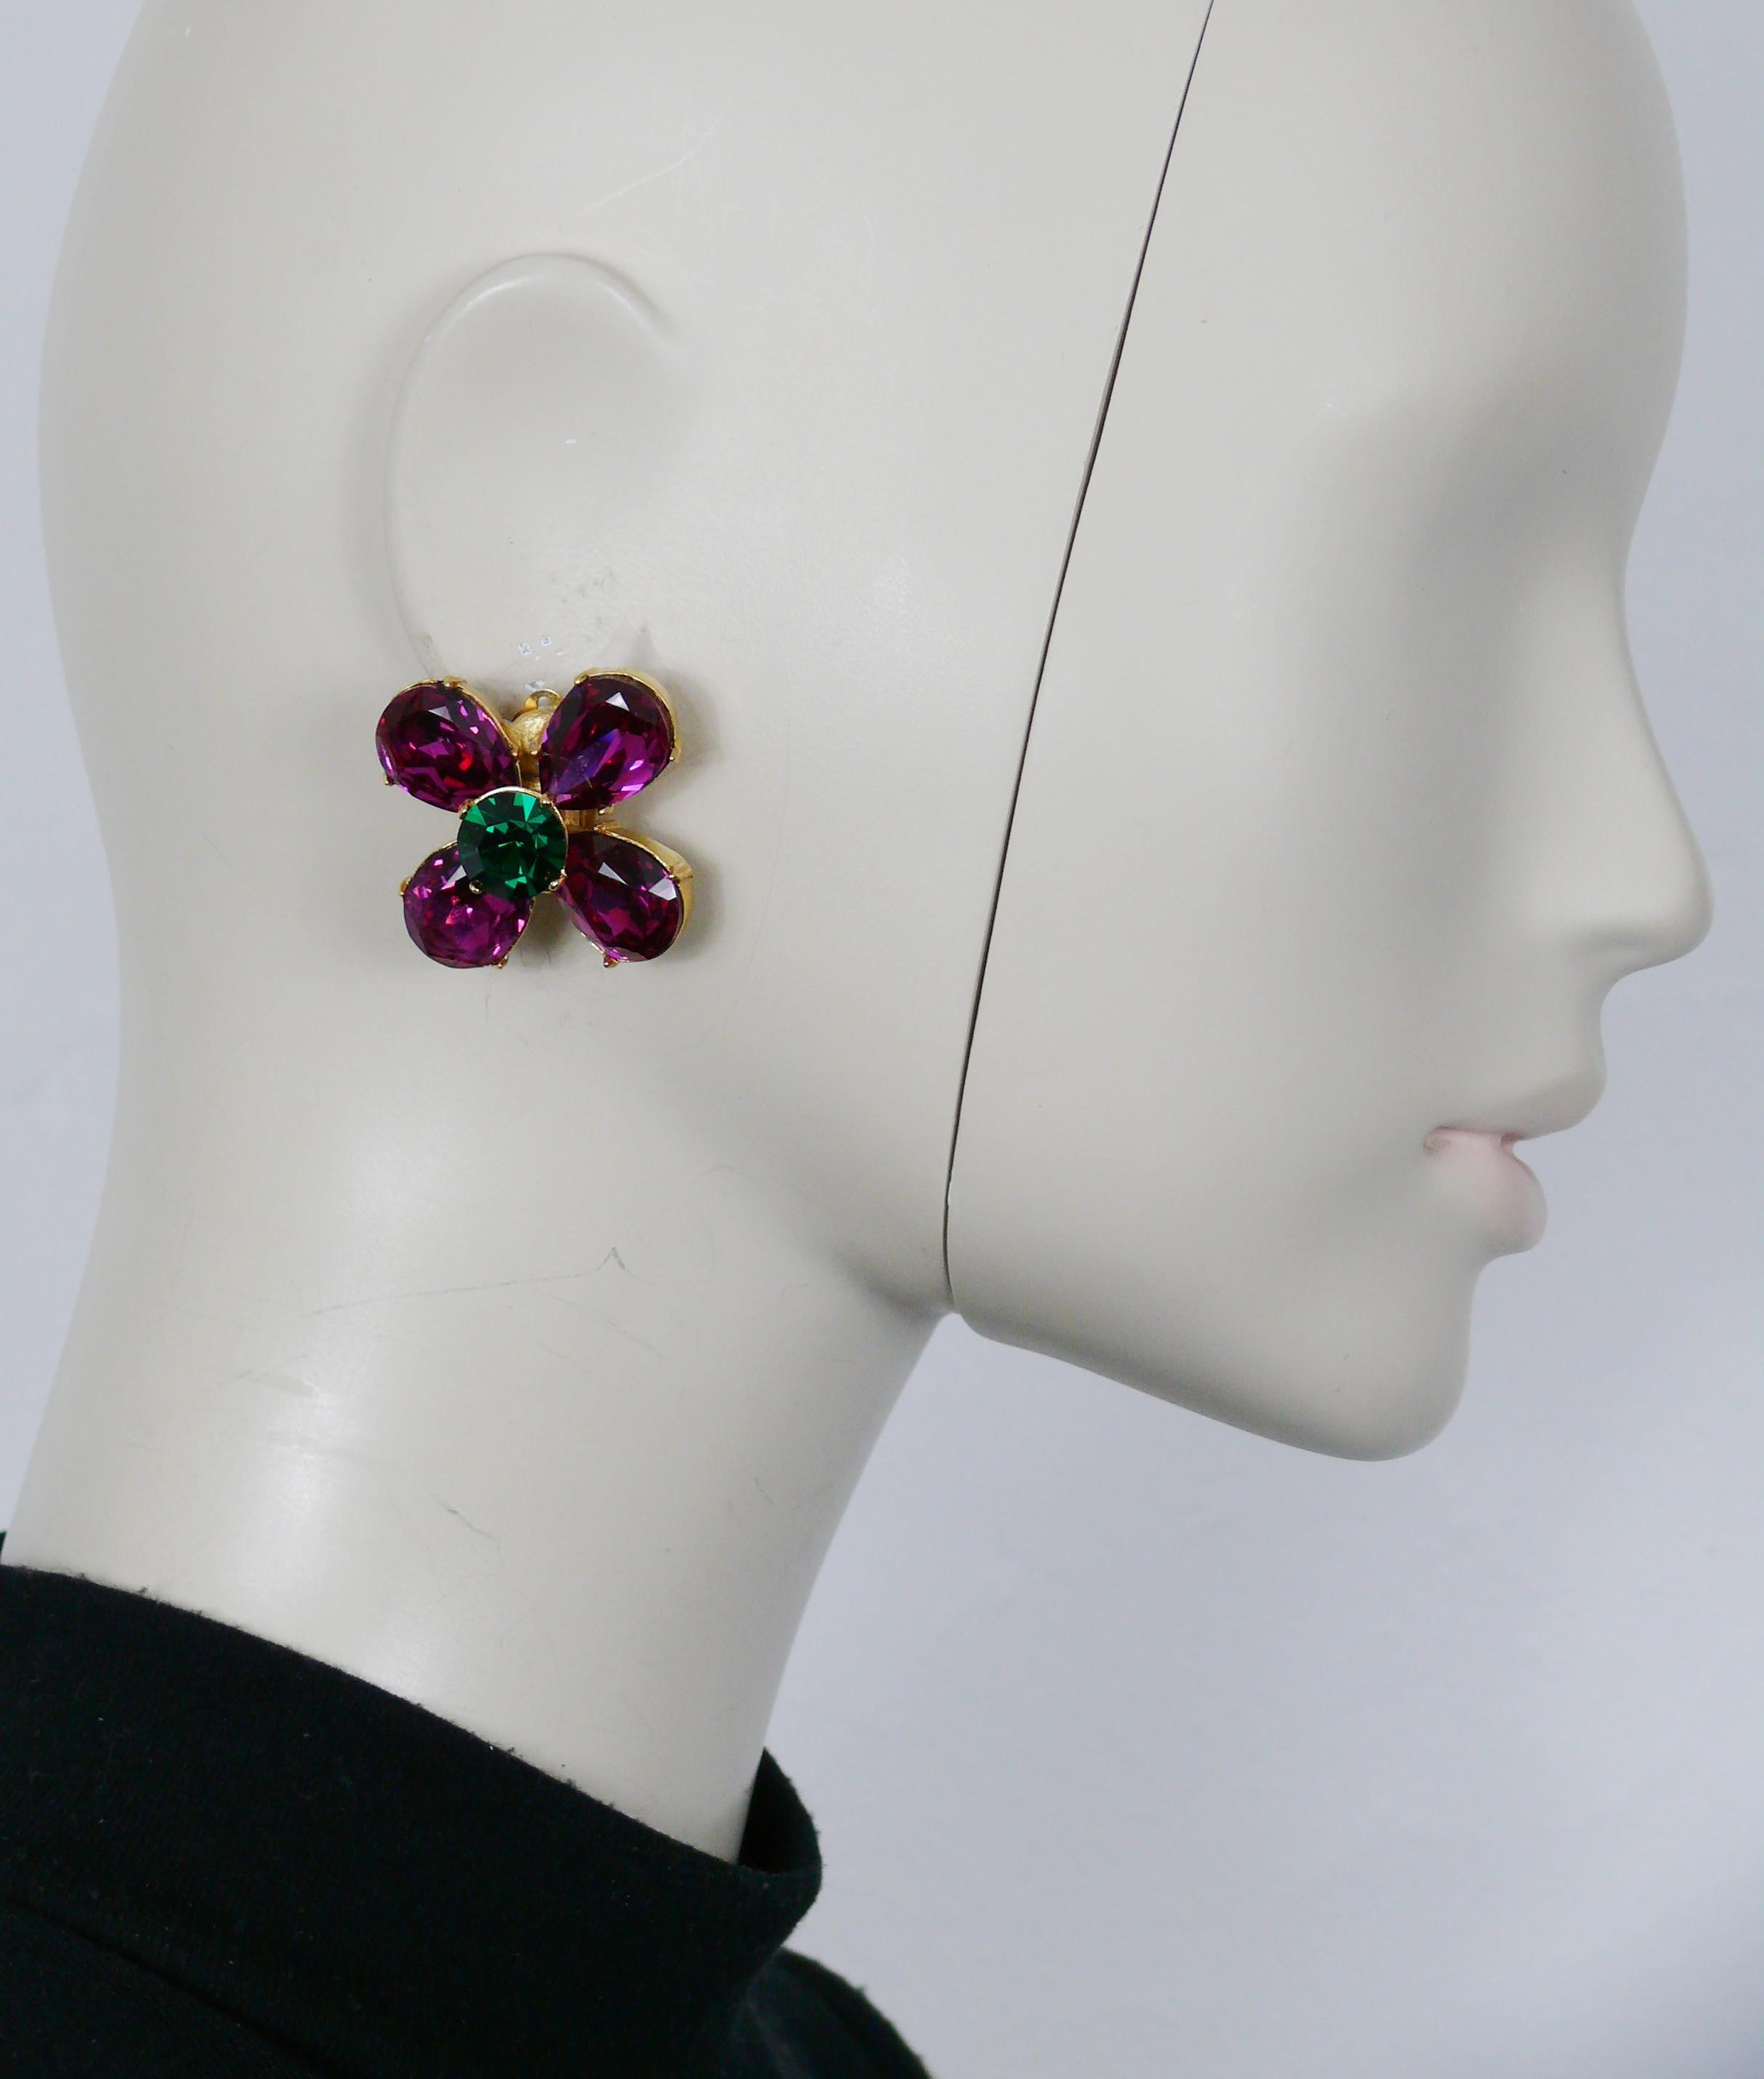 YVES SAINT LAURENT vintage flower clip-on earrings embellished with fuchsia and green crystals.

Embossed YSL Made in France.

Indicative measurements : approx. 3.3 cm x 3.3 cm (1.30 inches x 1.30 inches).

Weight per earring : approx. 22